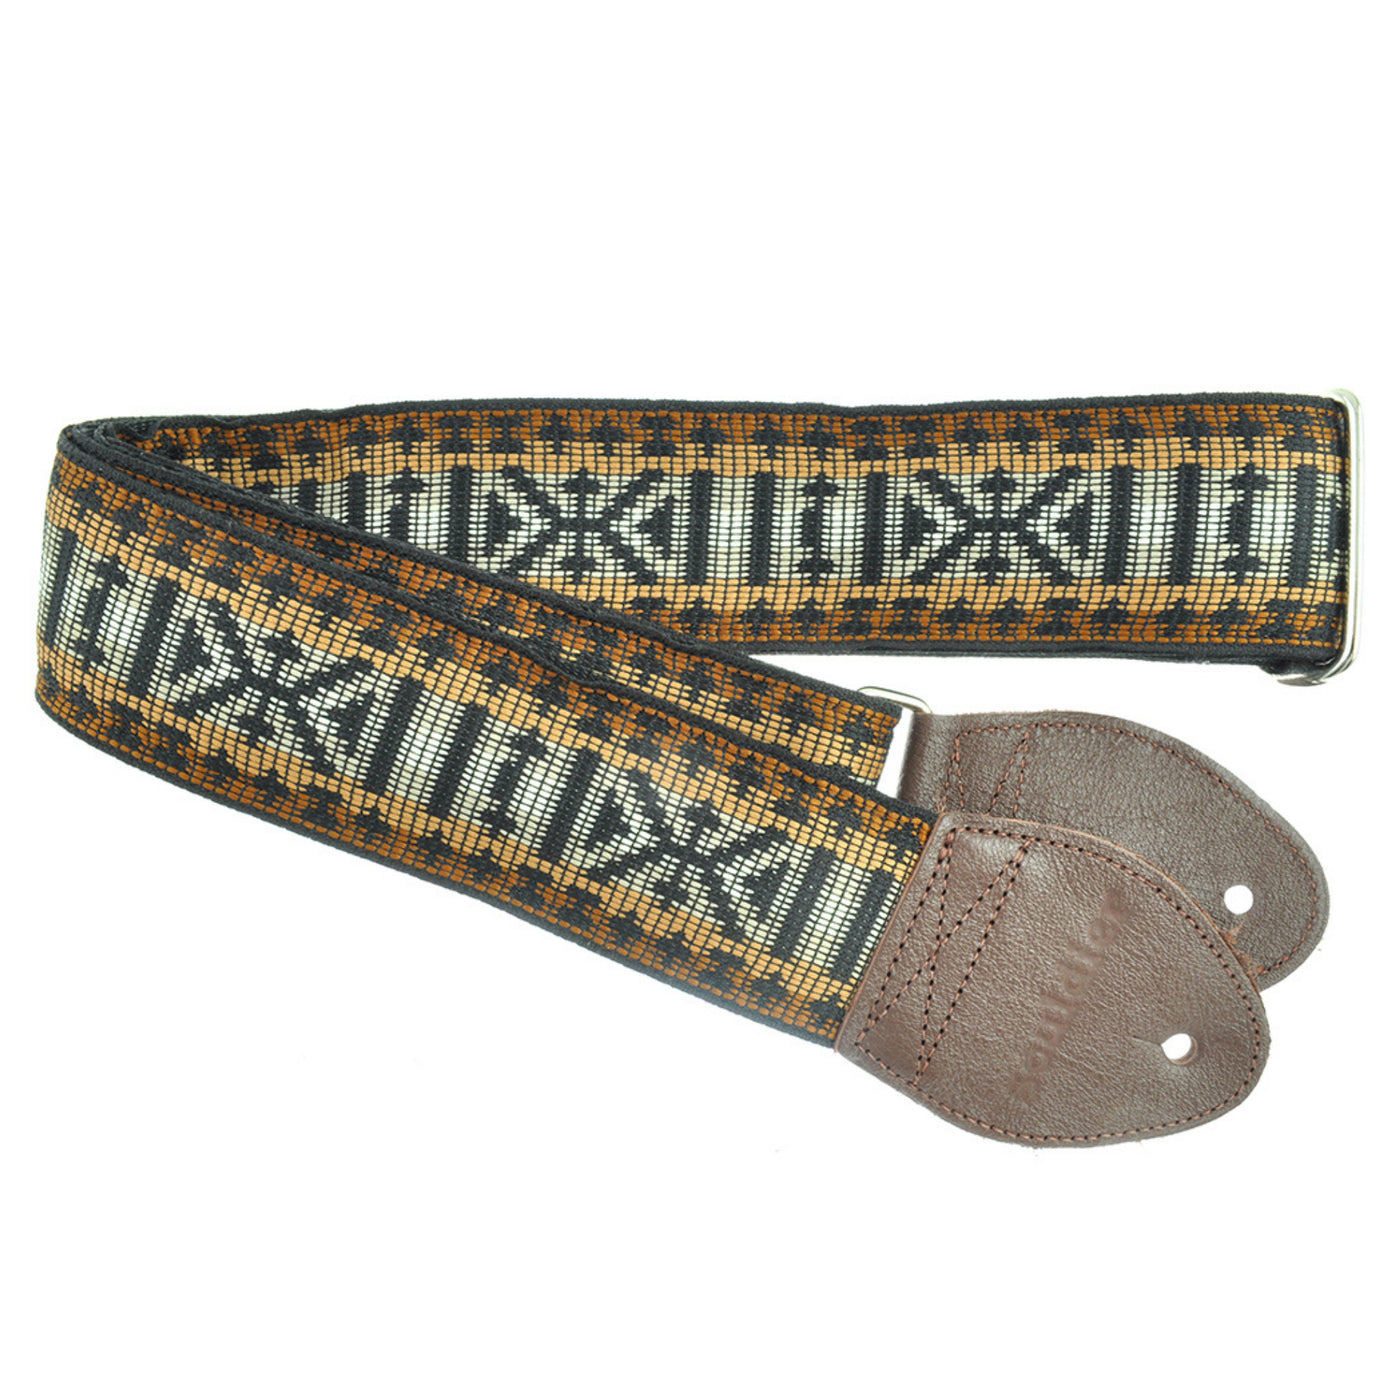 Souldier GS0886BK02WB - Handmade Seatbelt Guitar Strap for Bass, Electric or Acoustic Guitar, 2 Inches Wide and Adjustable Length from 30" to 63"  Made in the USA, Zapata